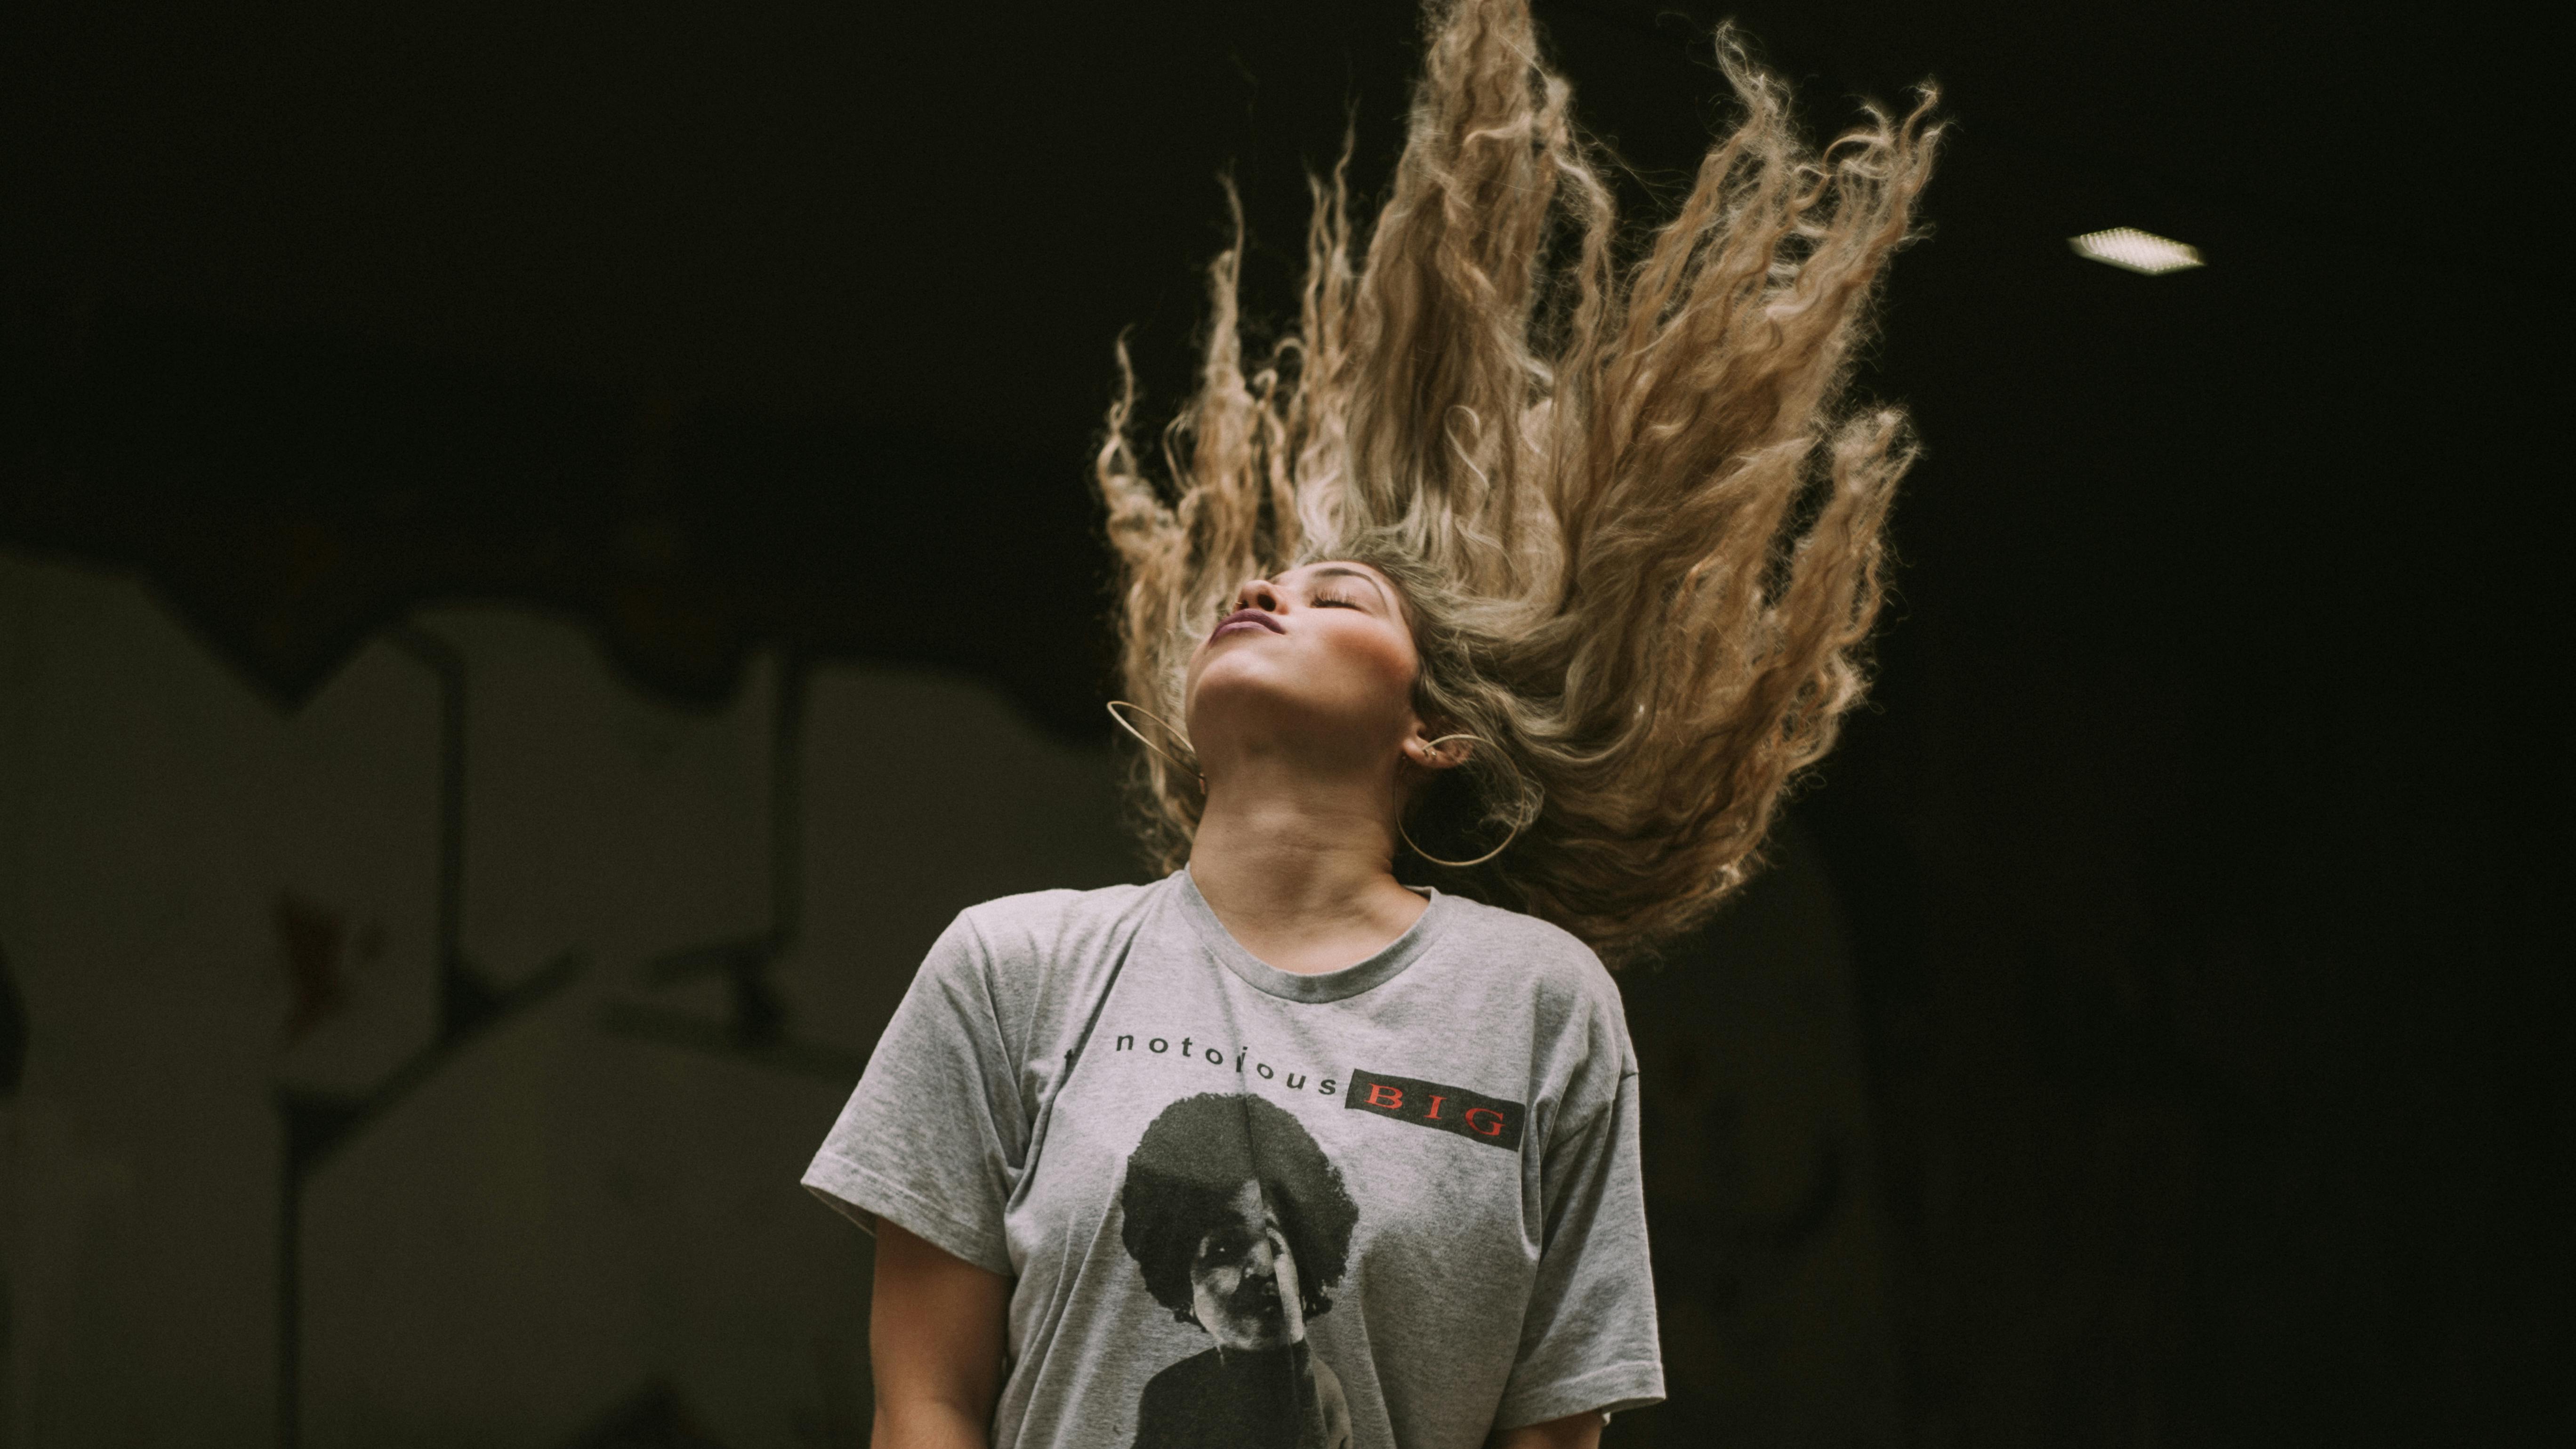 A Blonde Woman Whipping Her Hair · Free Stock Photo